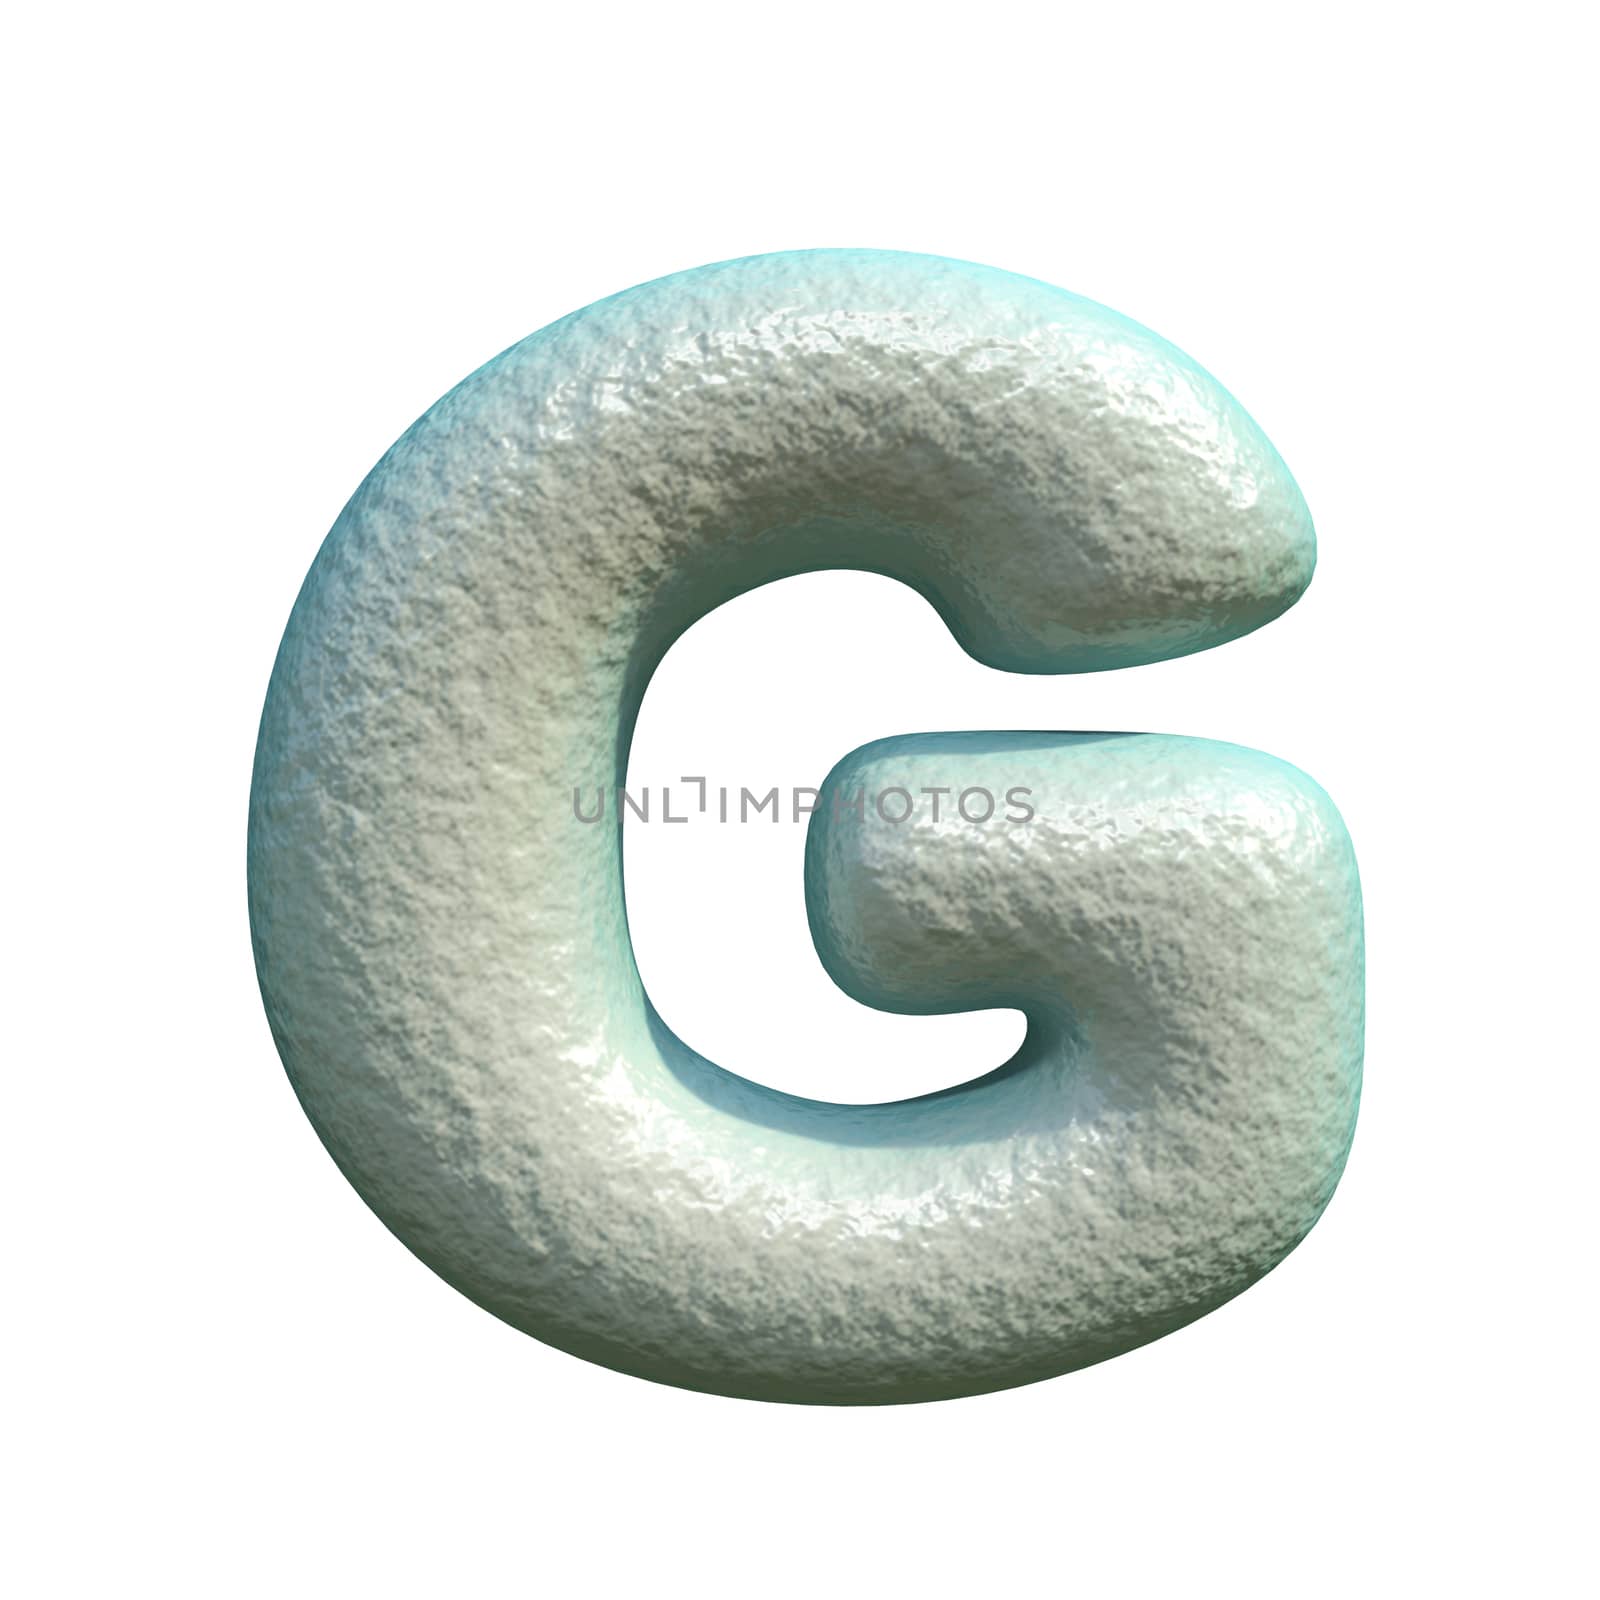 Grey blue clay font Letter G 3D rendering illustration isolated on white background